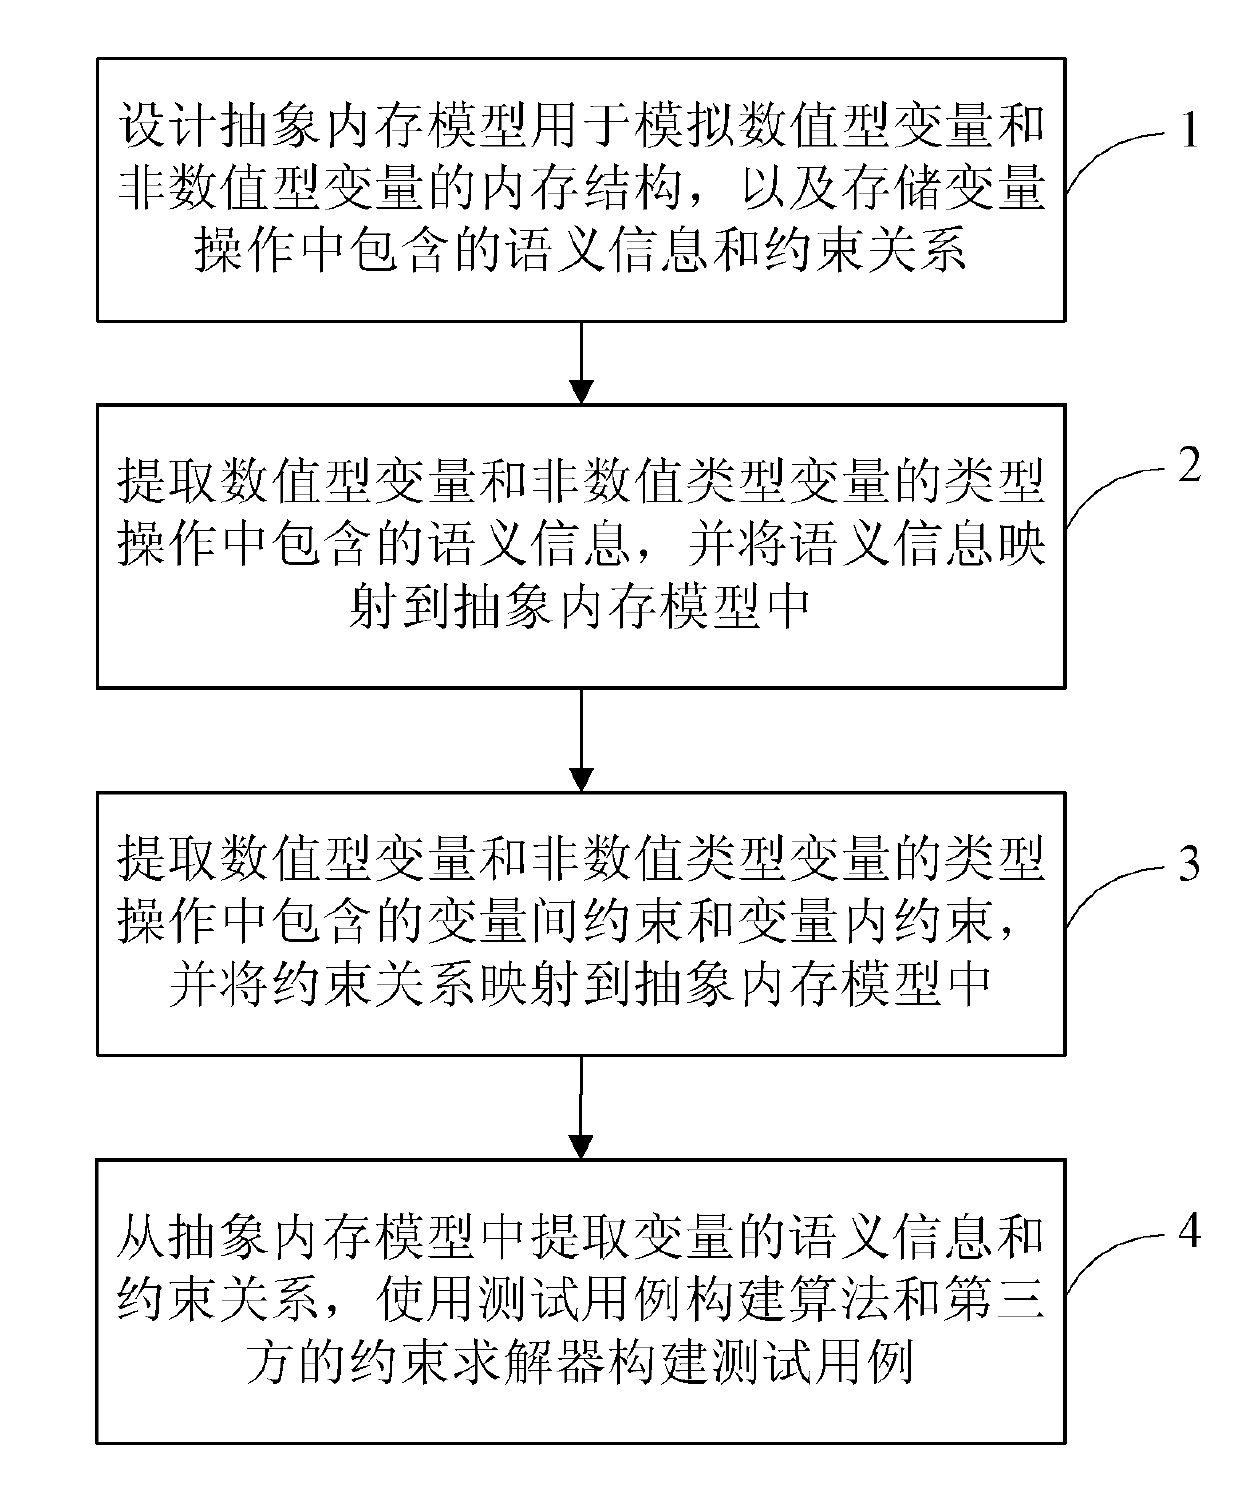 Abstract memory model-based method for calculating non-numerical type data